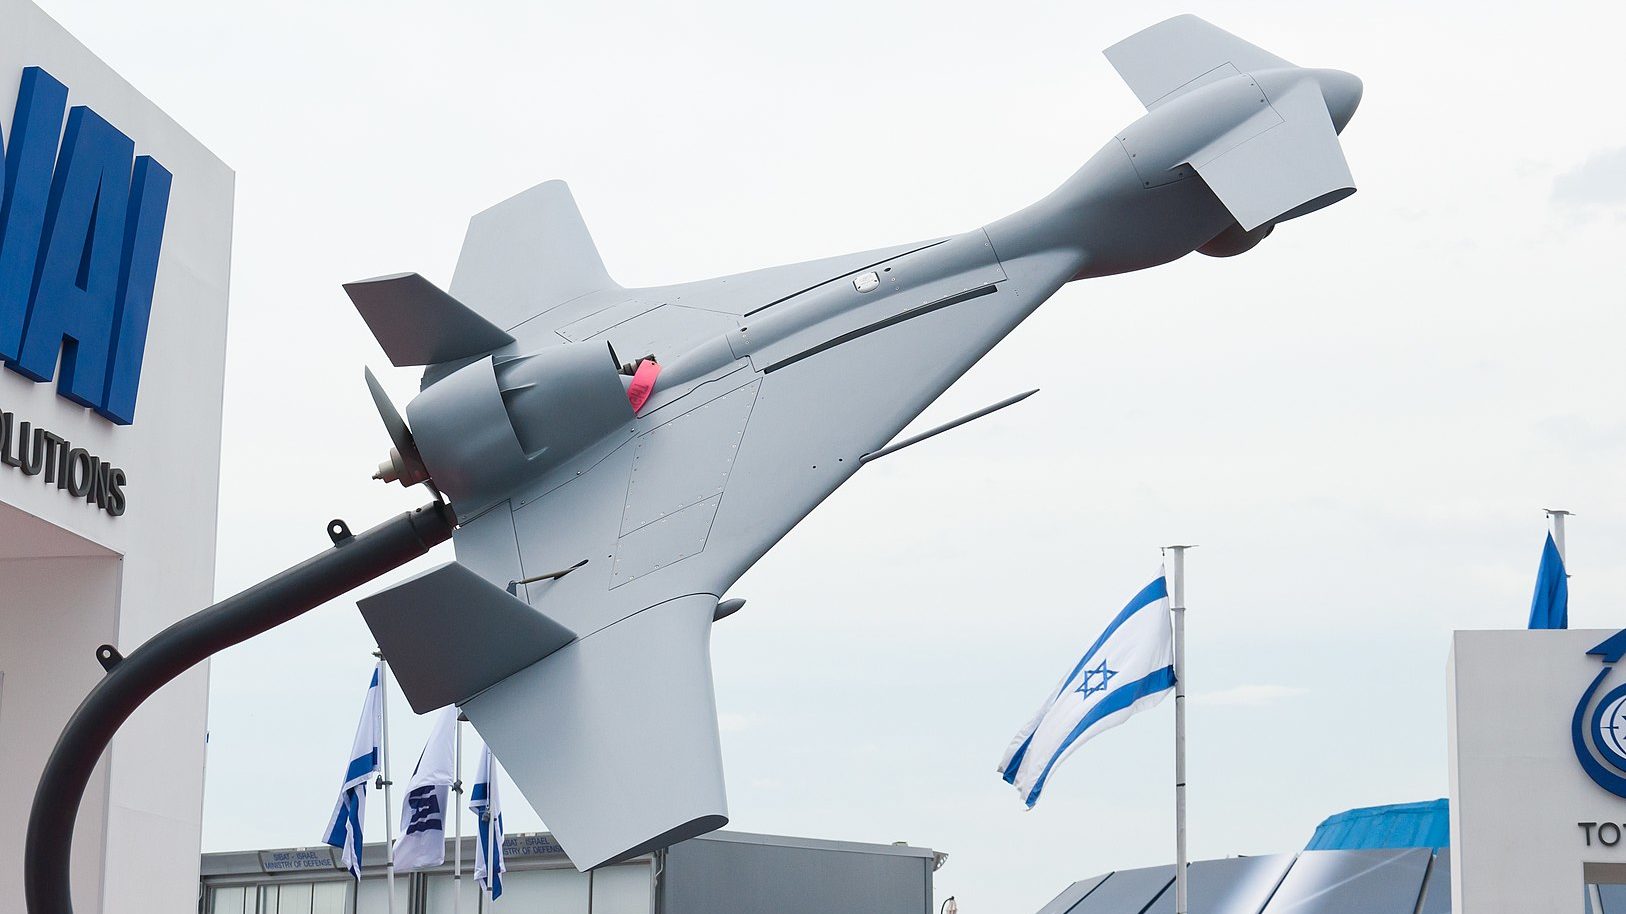 Morocco Reportedly Will Manufacture Drones Using Israeli Technology